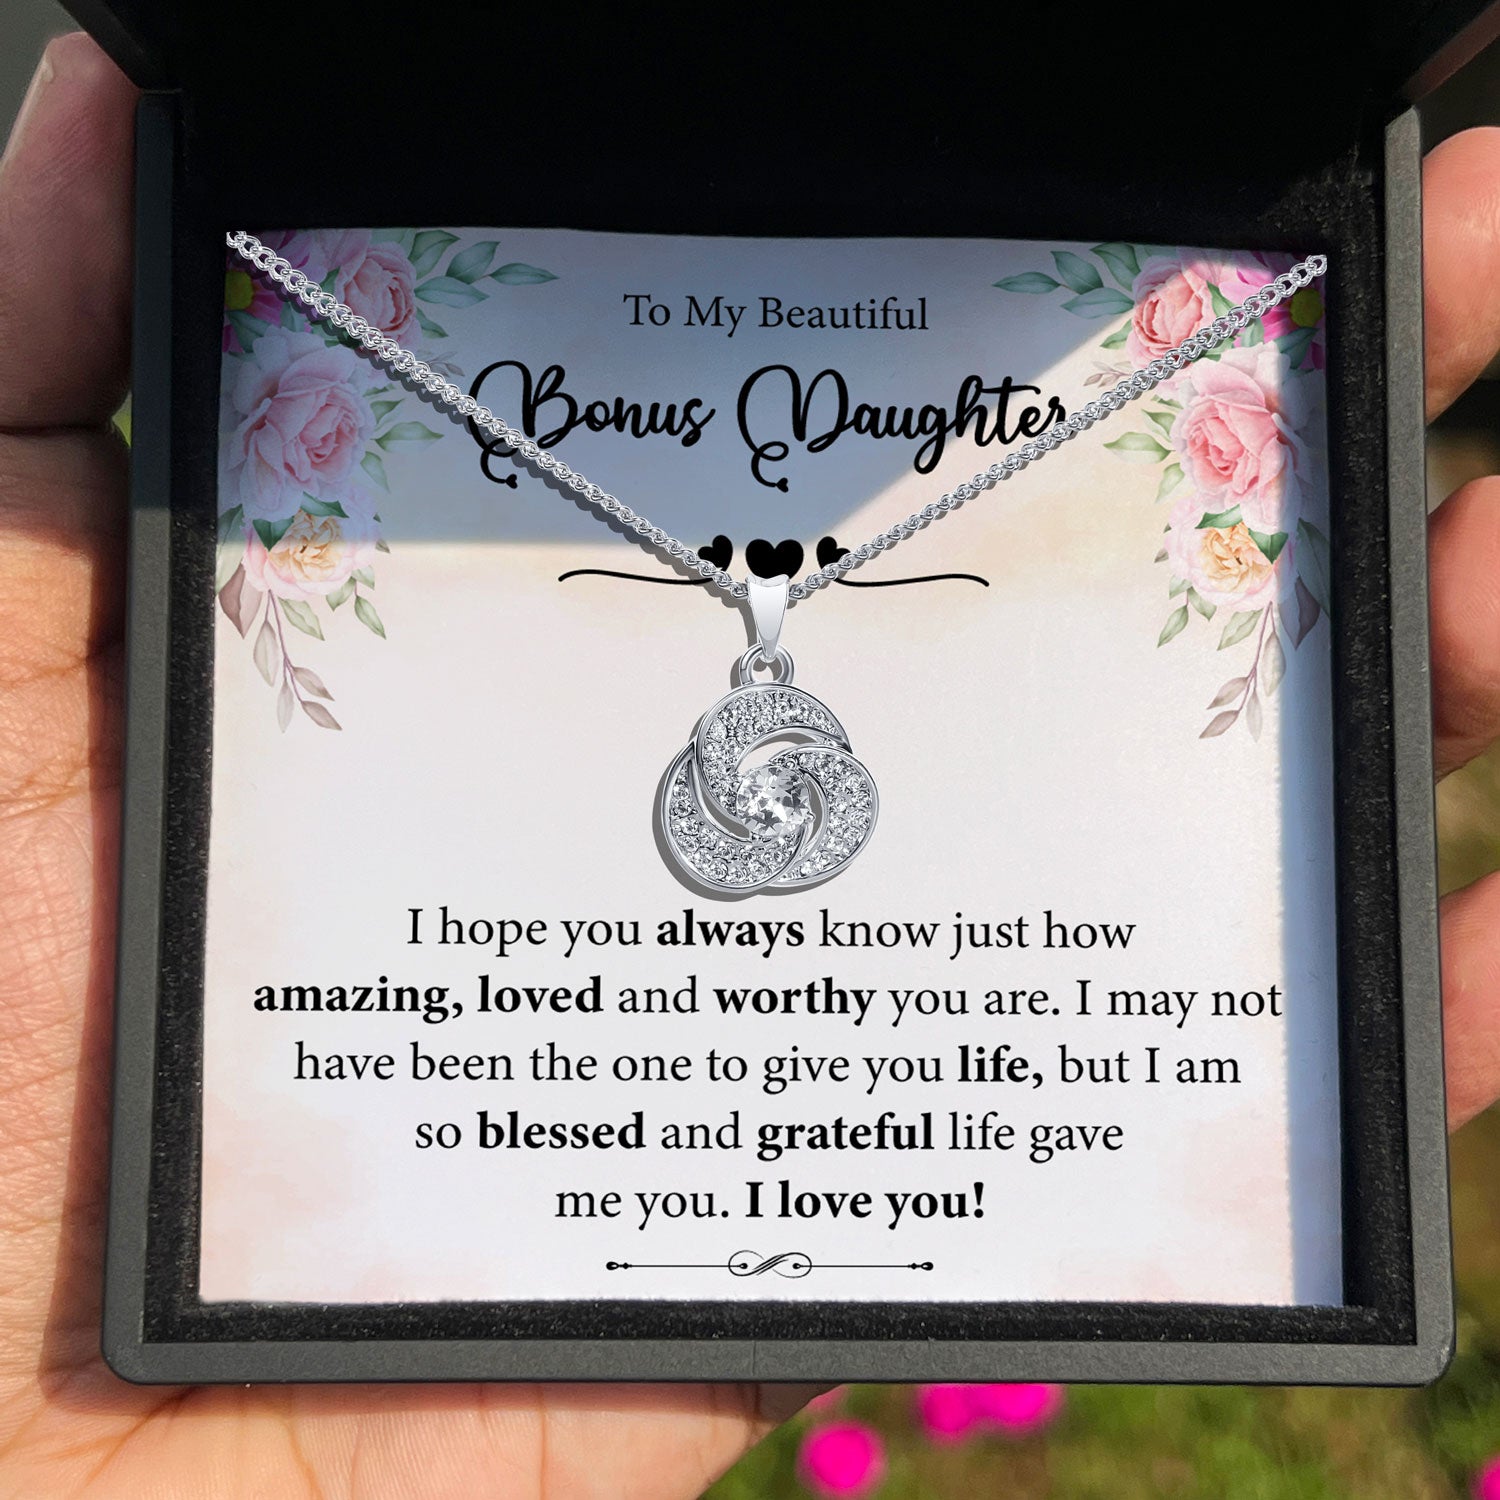 To My Beautiful Bonus Daughter - I Love You! - Tryndi Love Knot Necklace